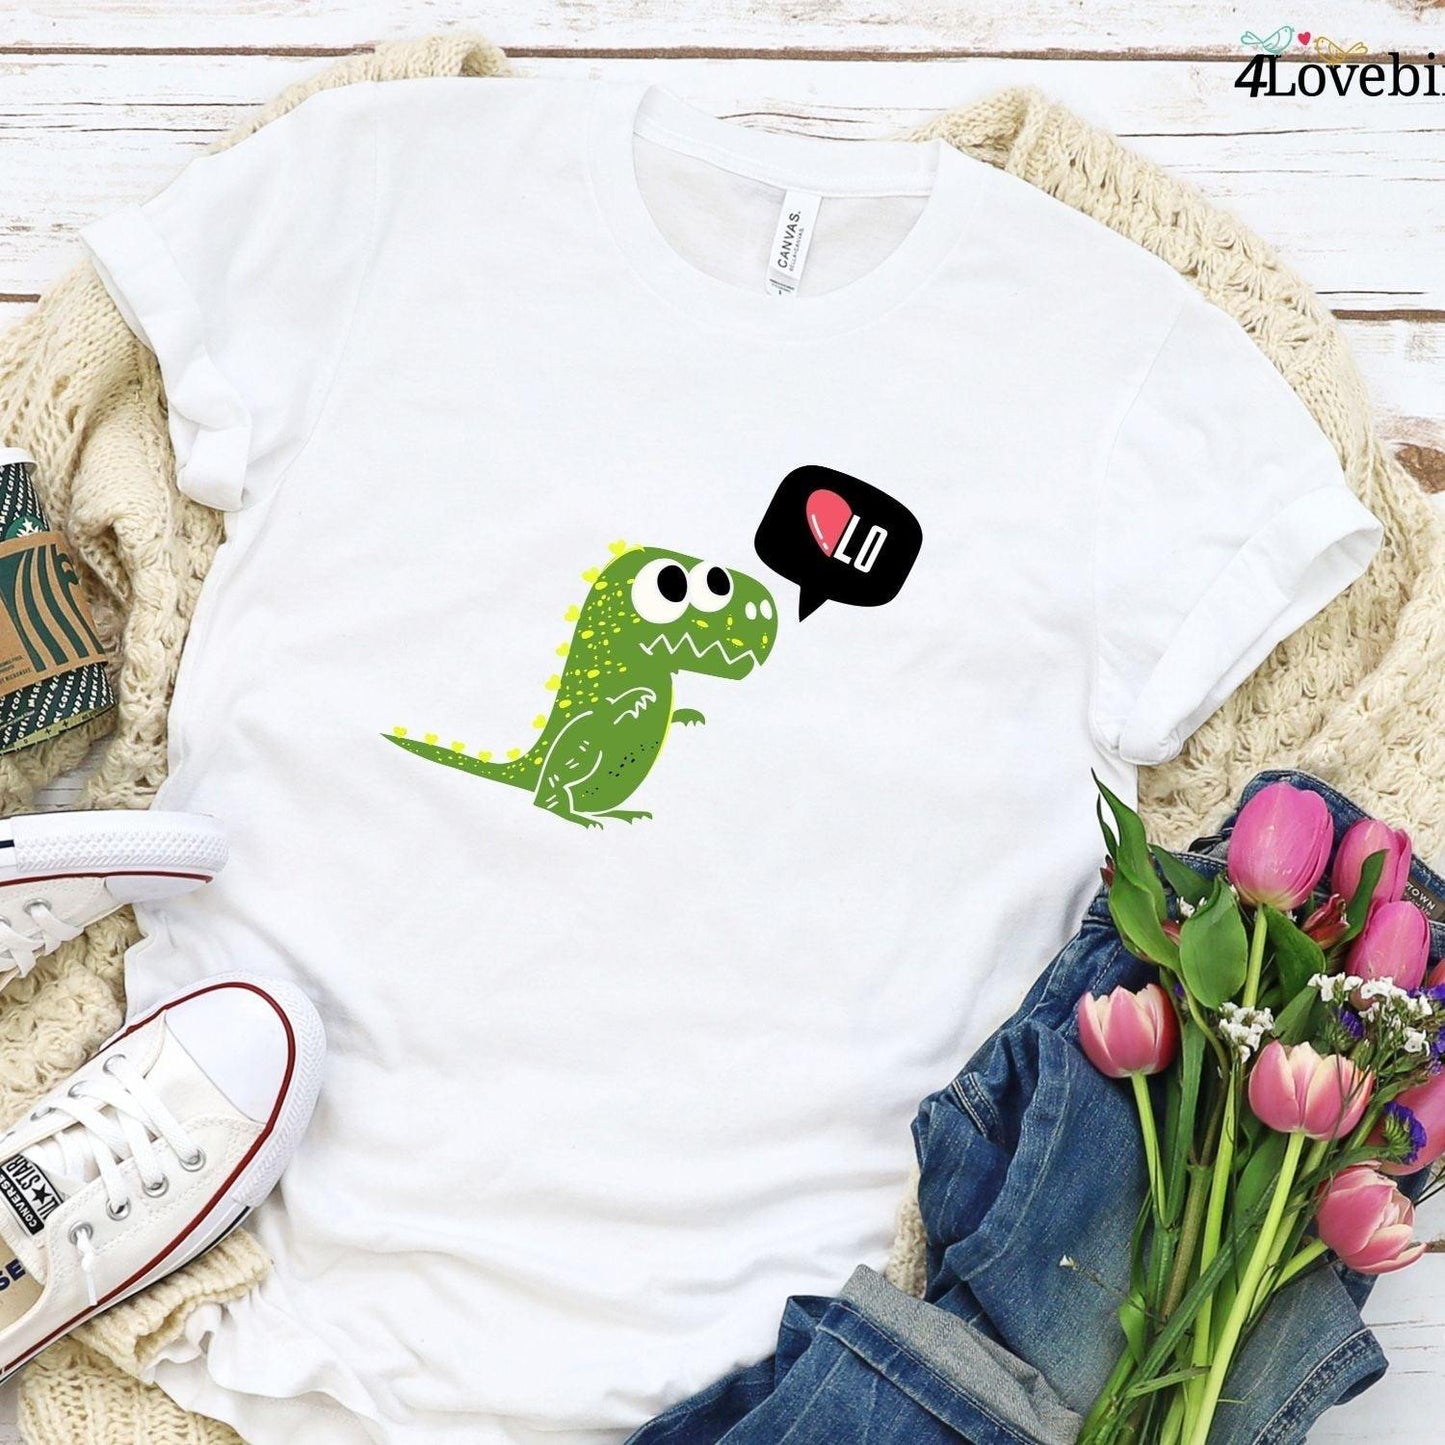 LO & VE Dinosaur Matching Outfits - Ideal Couples' Get-up Gift! - 4Lovebirds